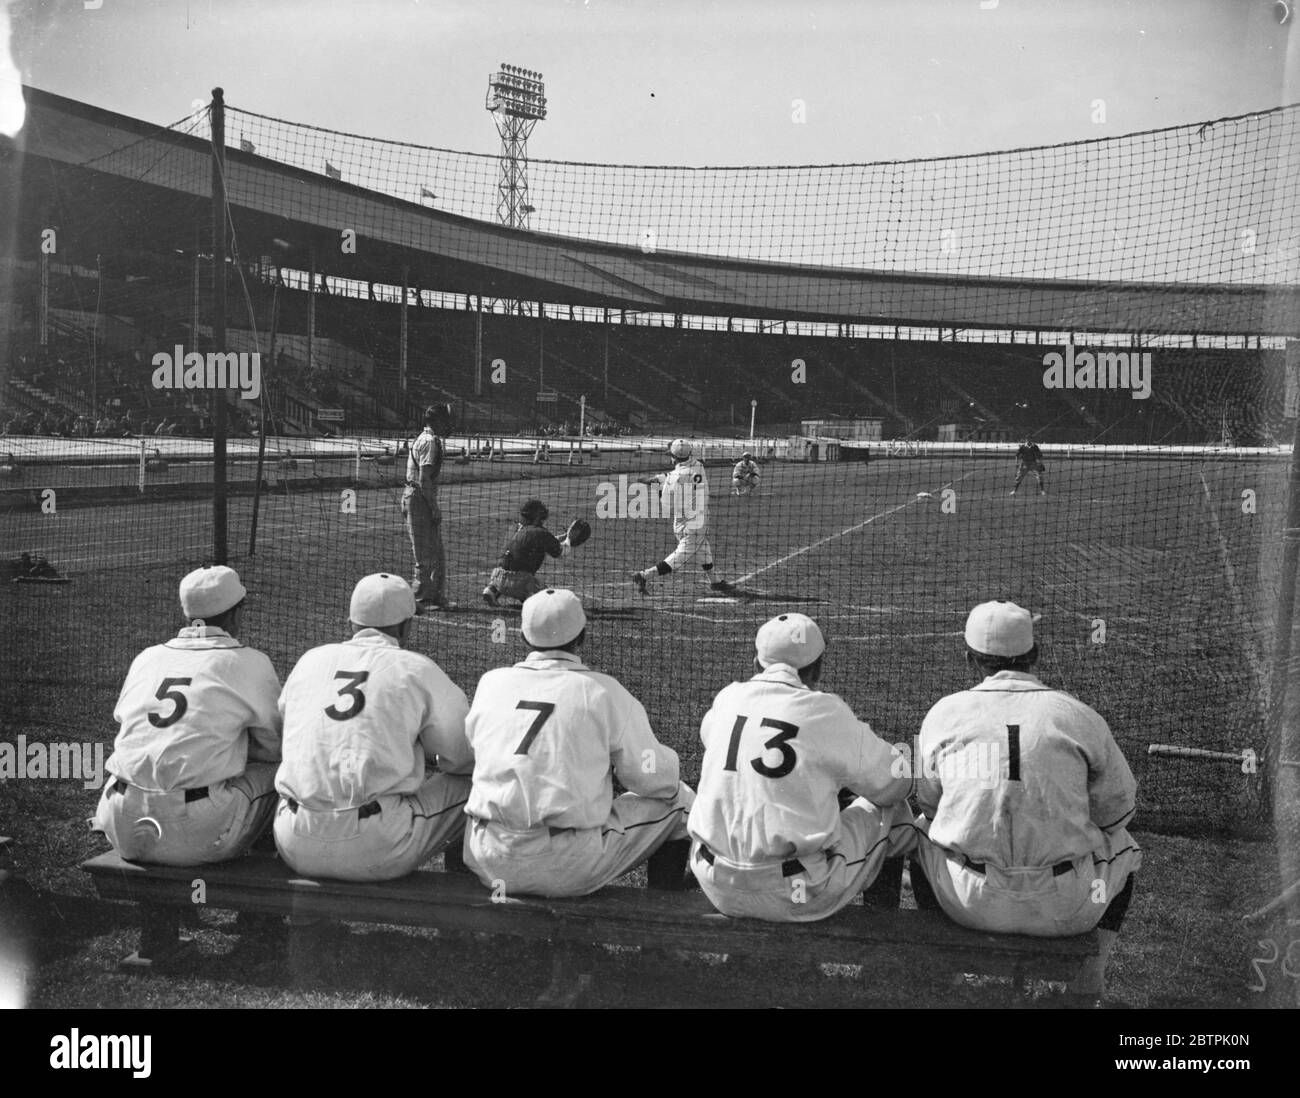 Watching points . First of Championship baseball match at White City . The first of a series of organised championship baseball matches took place between representative teams from London and Oxford at the White City Stadium , Shepherds Bush , London . Photo shows , London players concentrating on the game at White City . 11 August 1935 Stock Photo